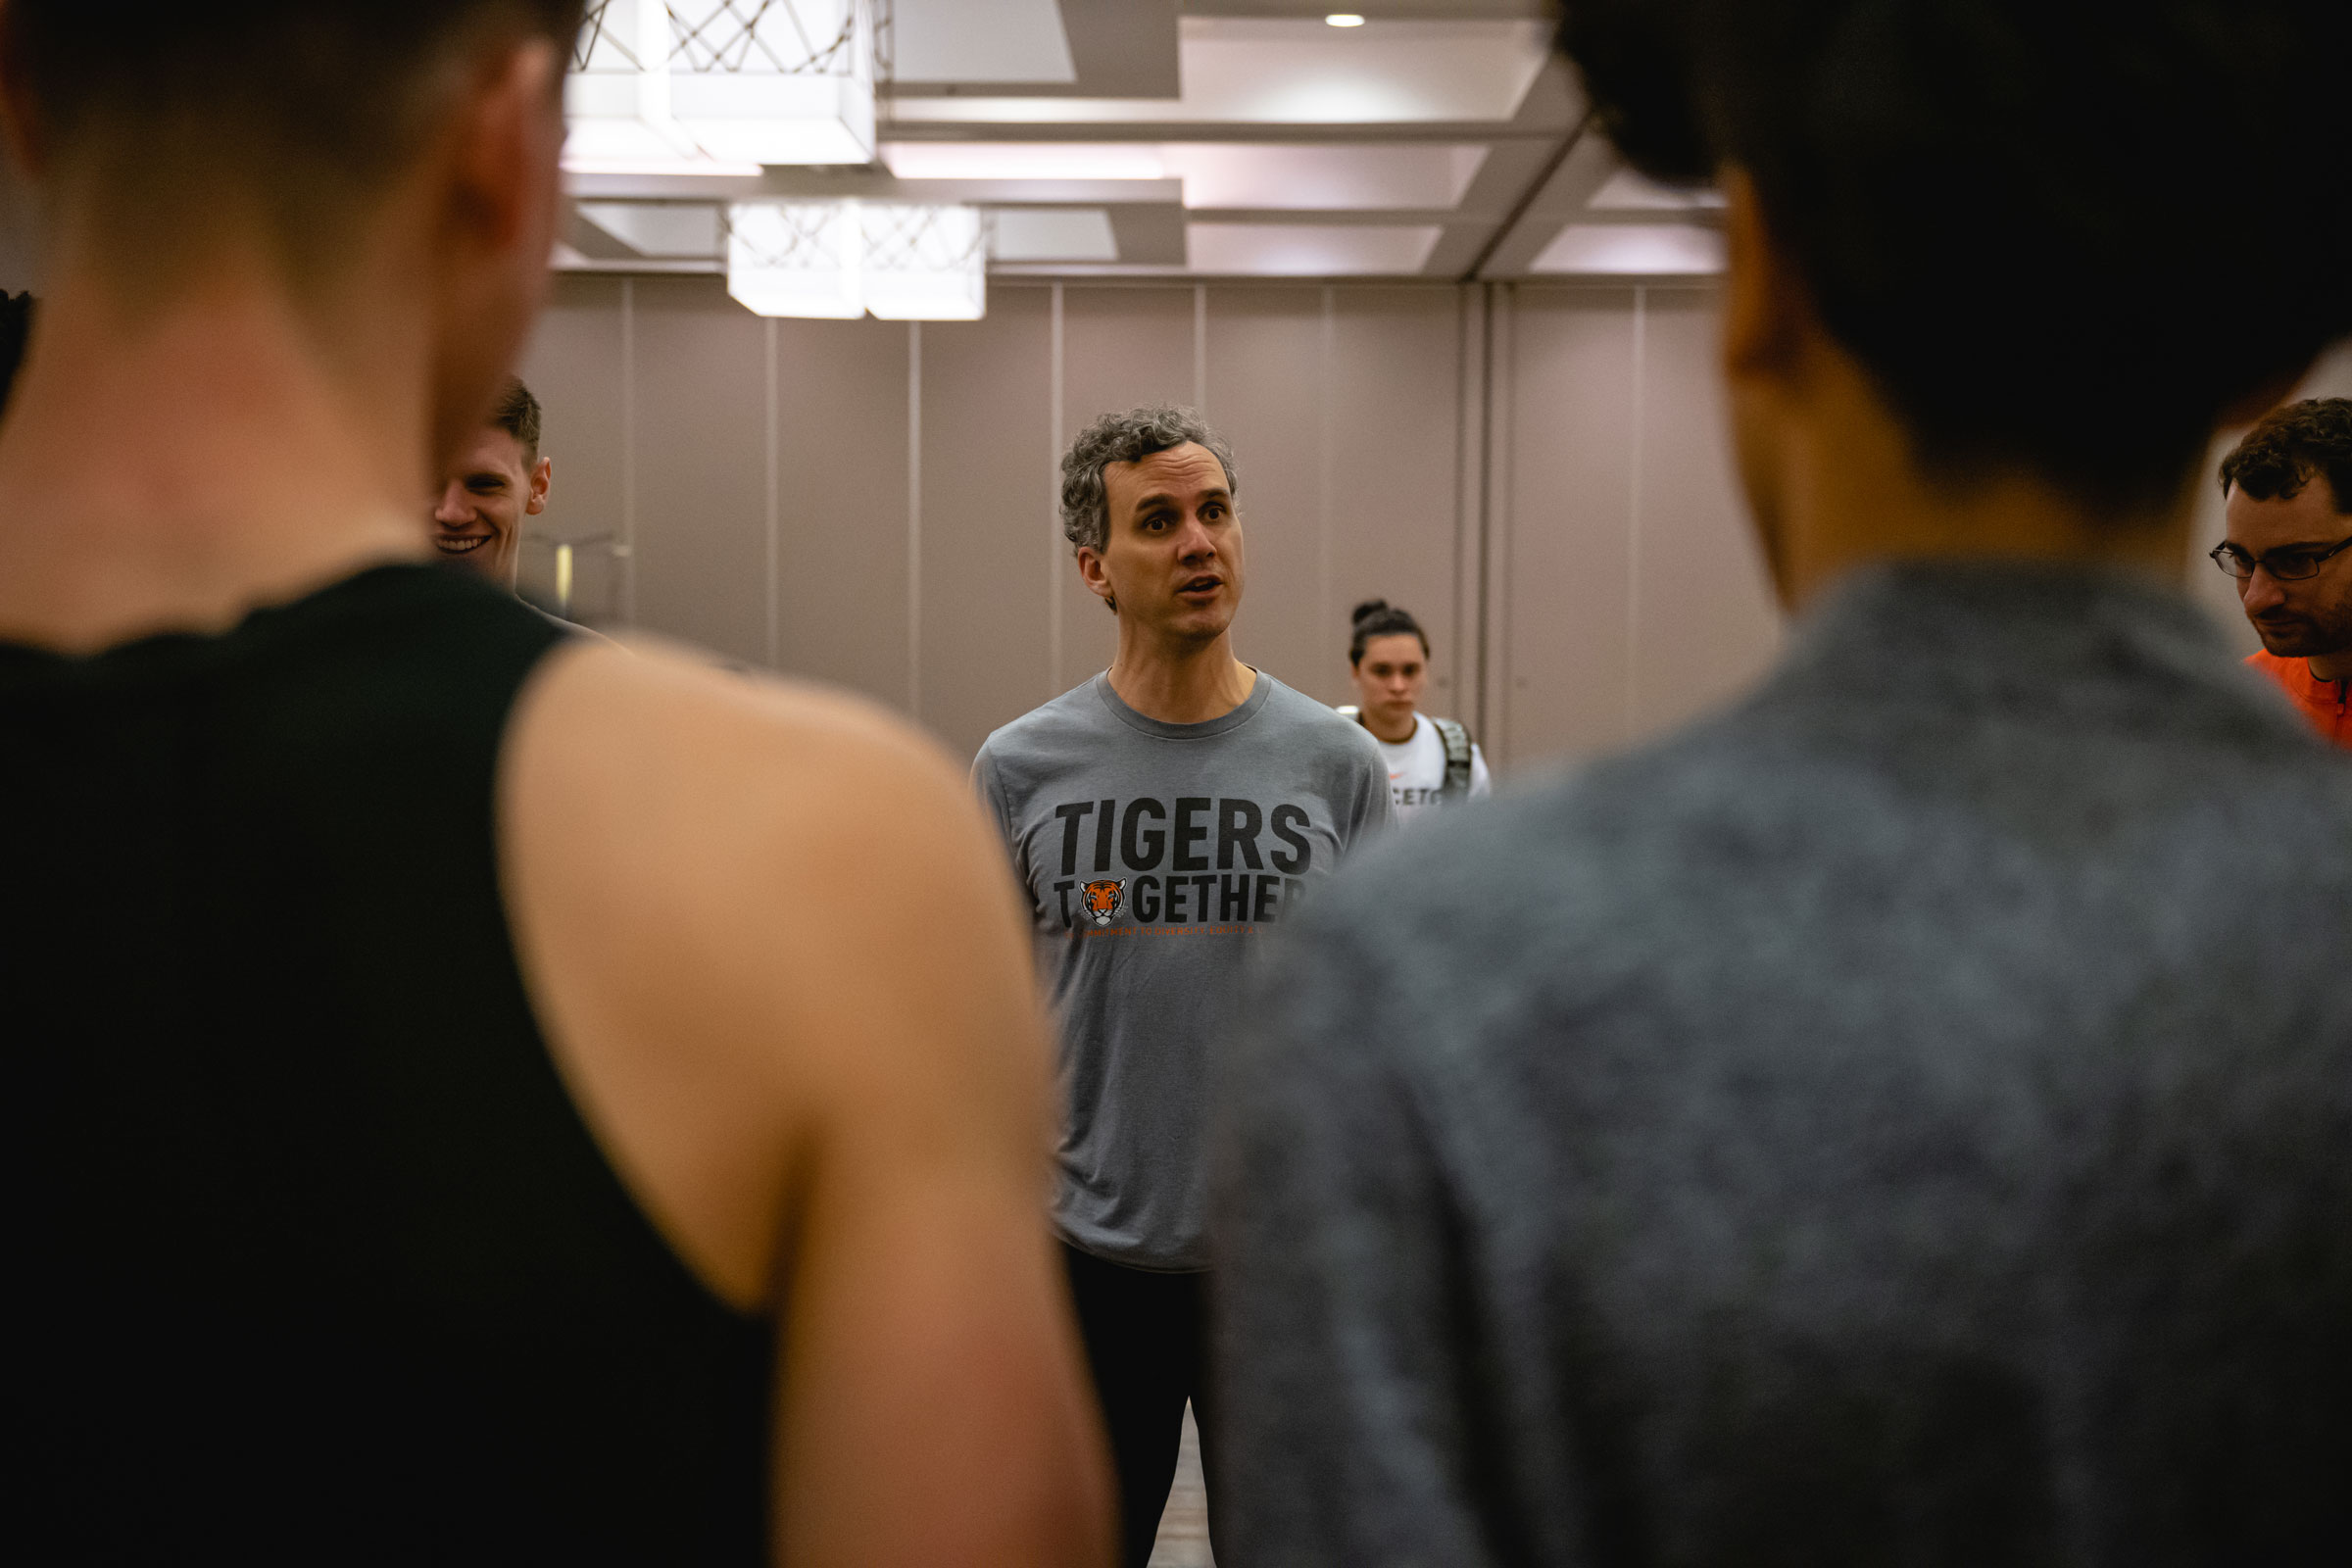 Coach Mitch Henderson speaks with the team during a practice session at Hyatt Regency Hotel in Louisville, Kentucky on March 23, 2023.